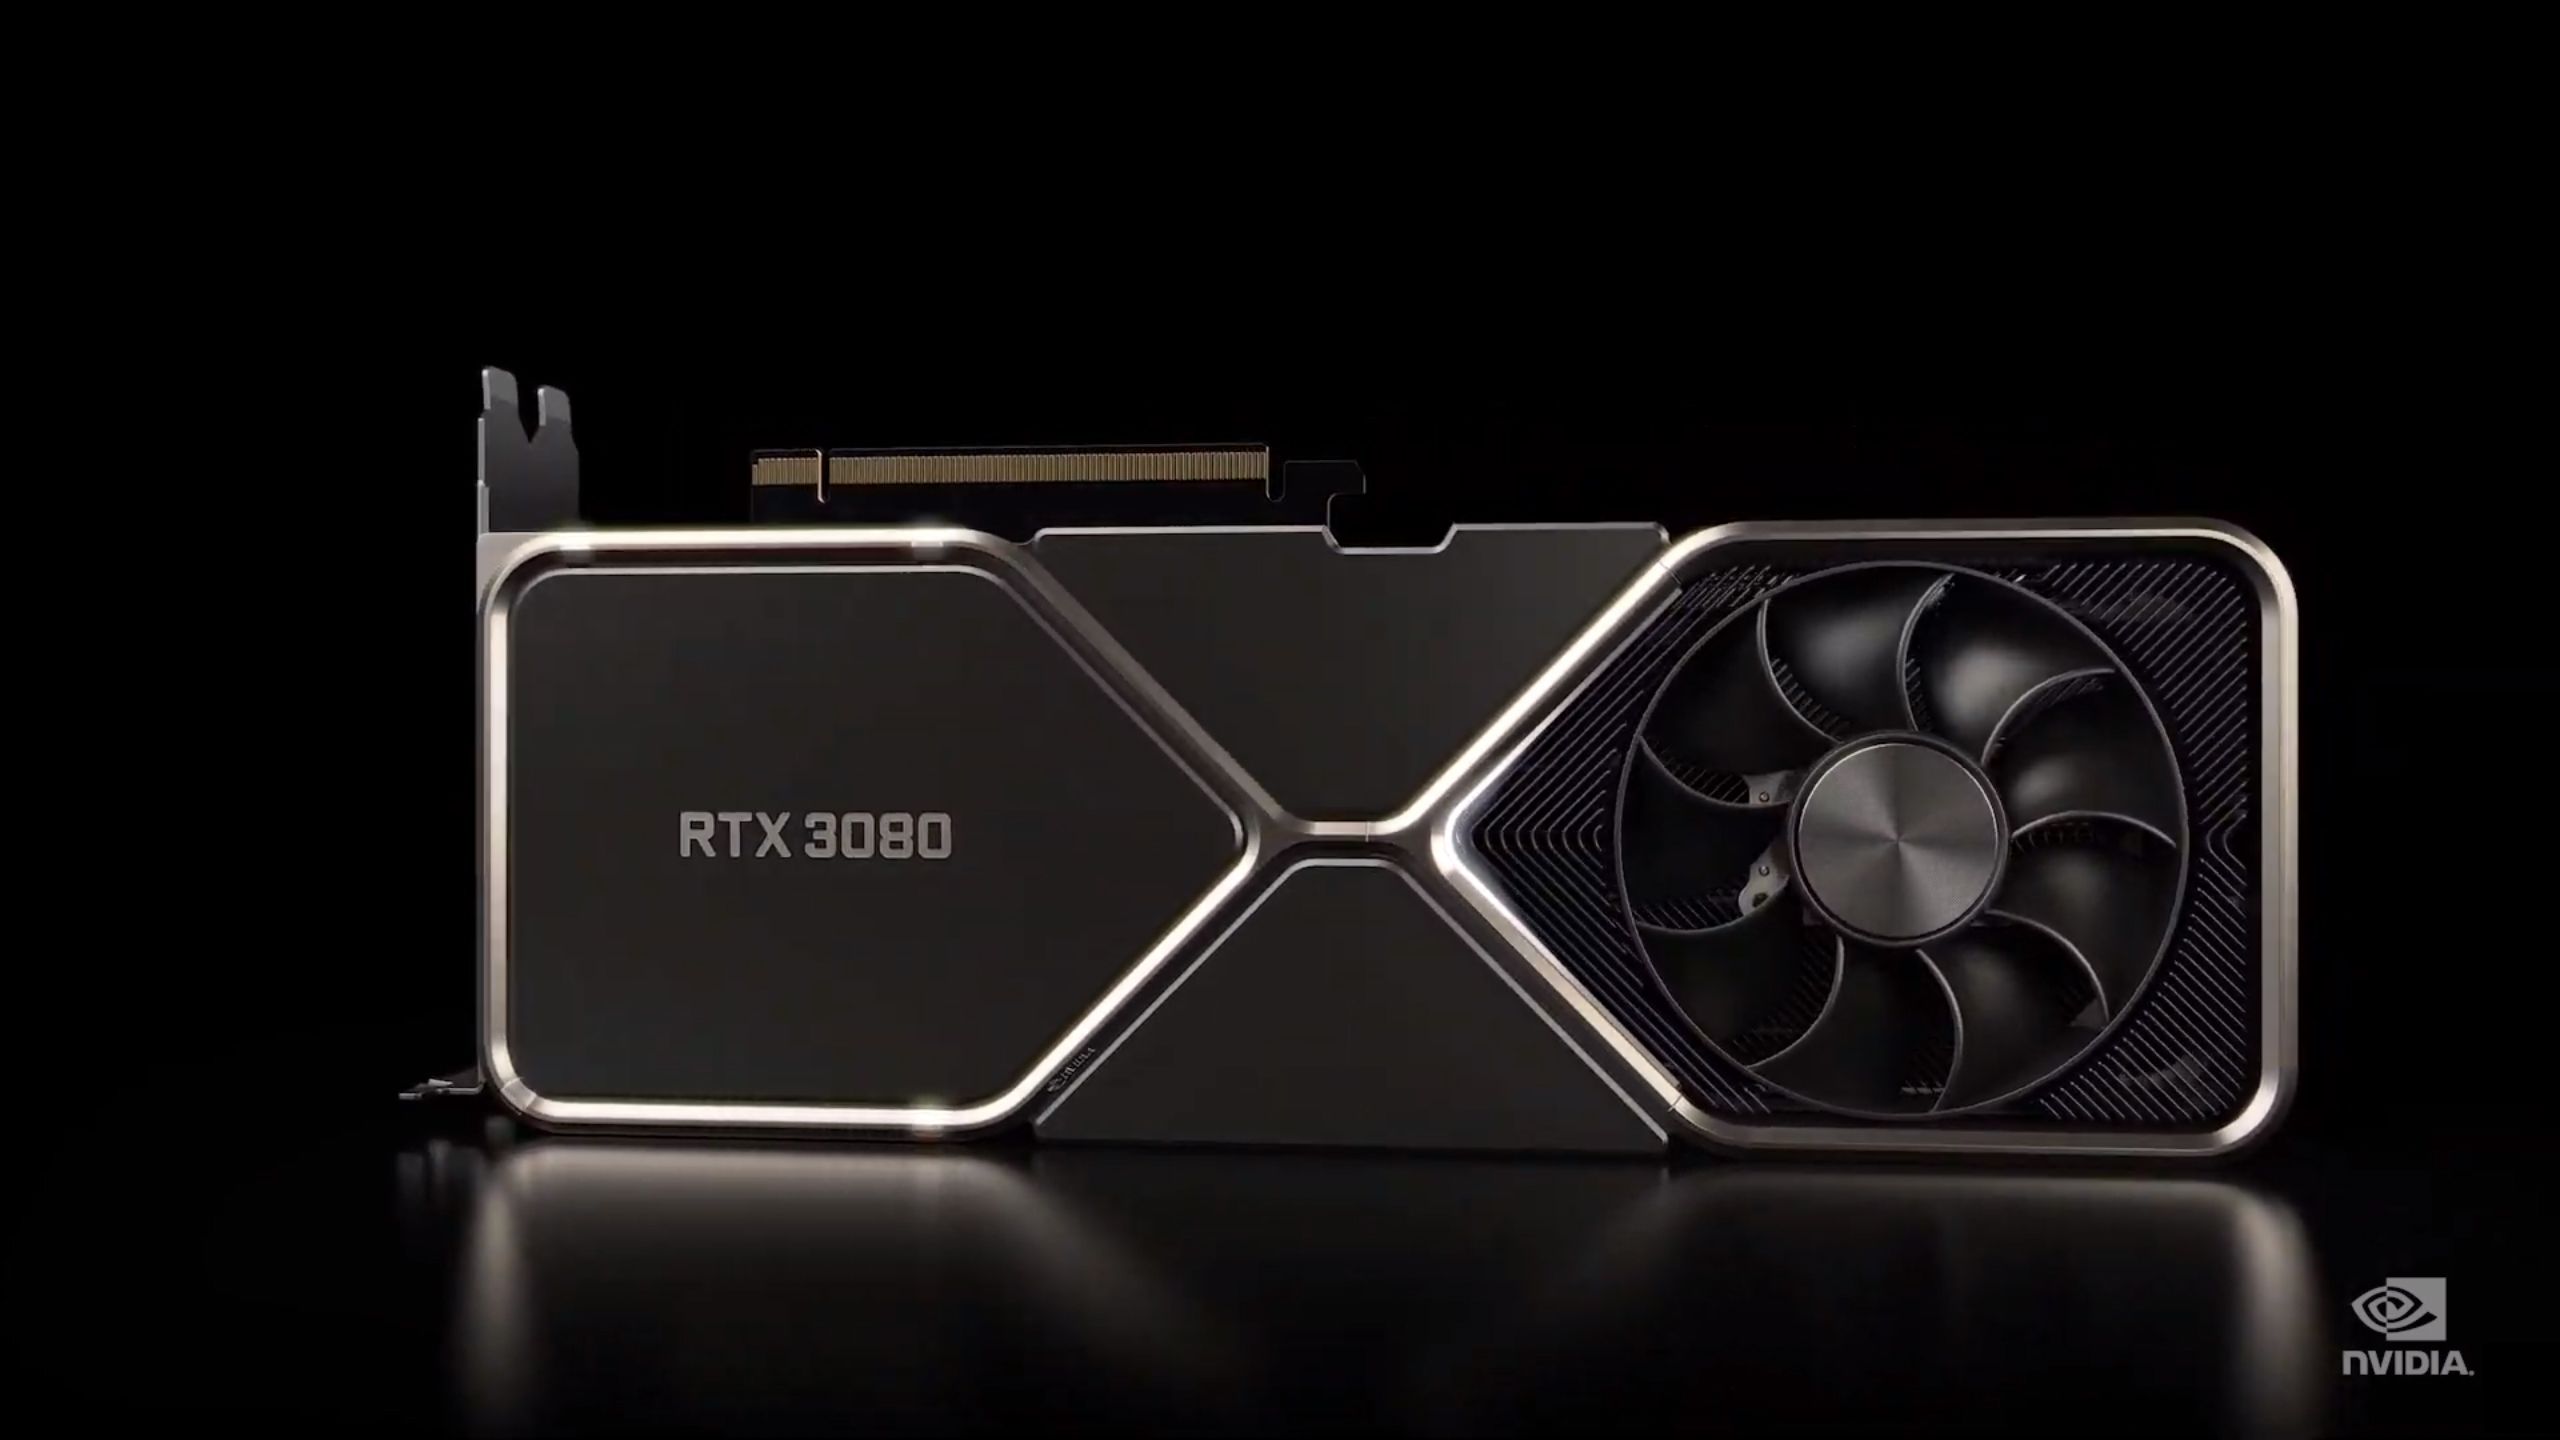 It looks like the Nvidia RTX 3080 might actually be that fast